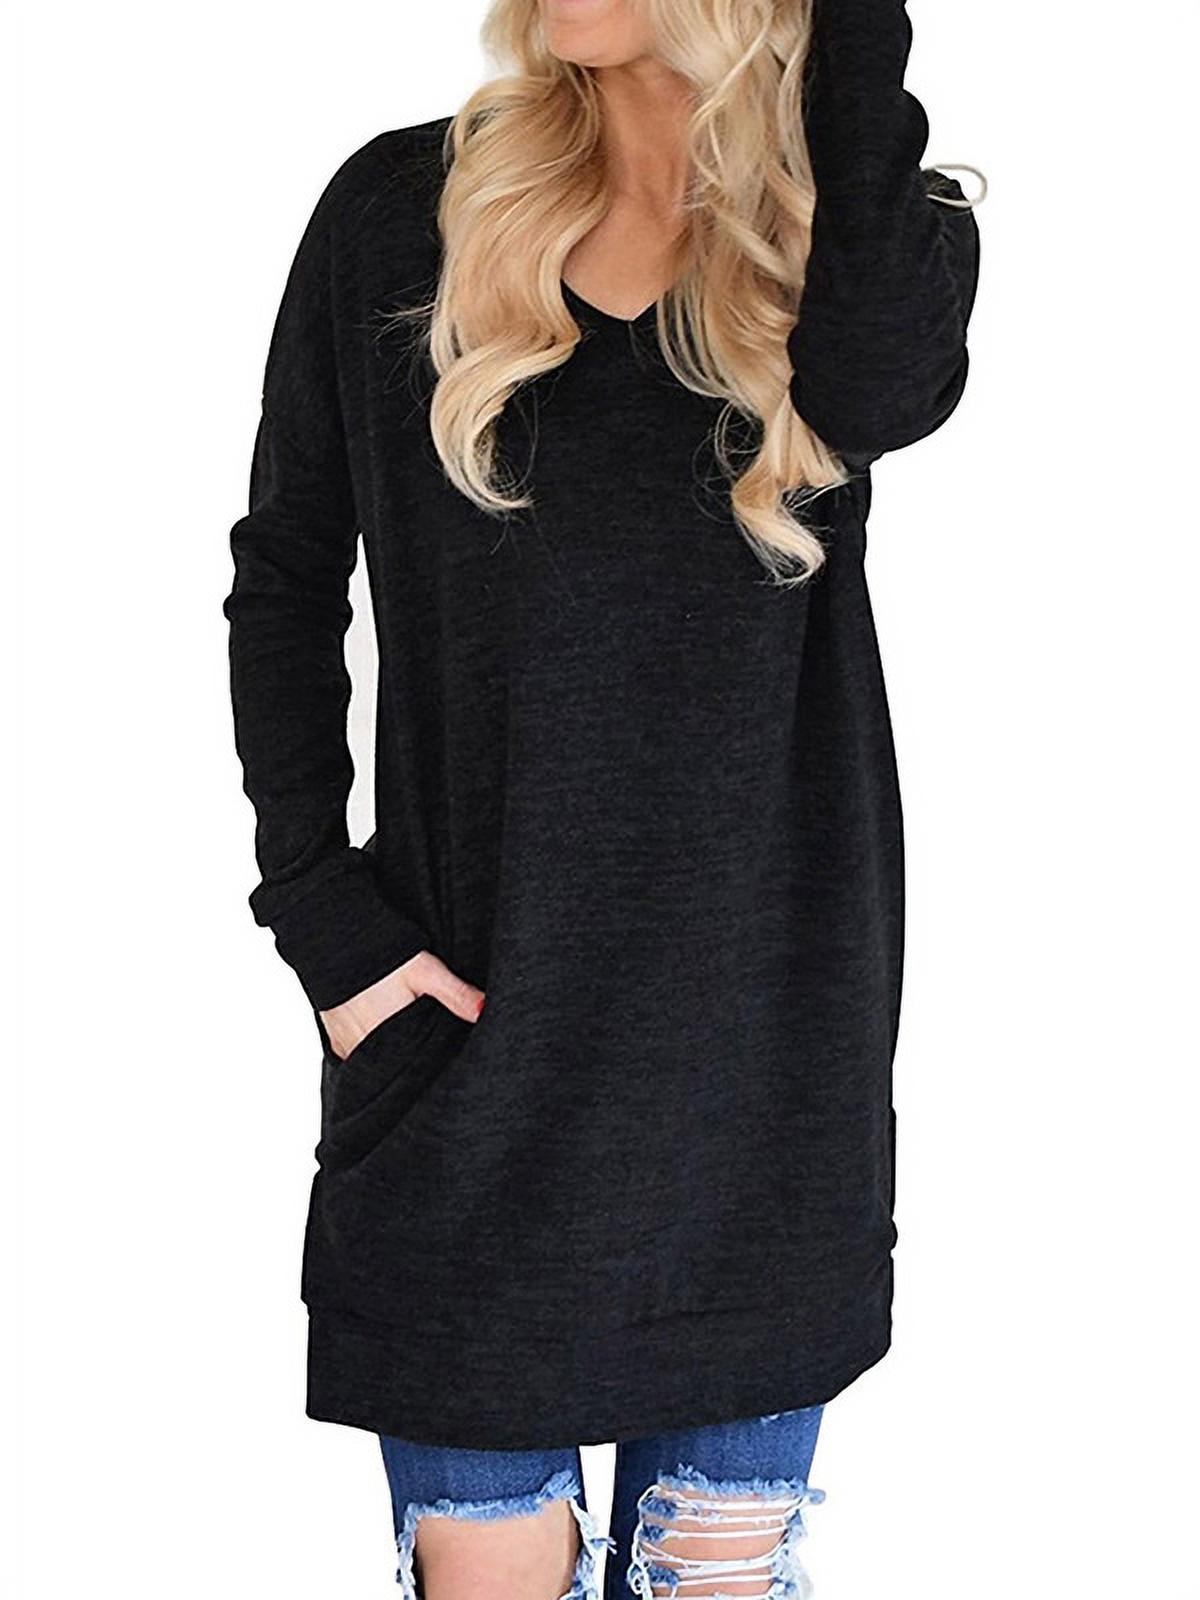 Women V-Neck Long Sleeves Pure Color Pocket Top - image 3 of 6